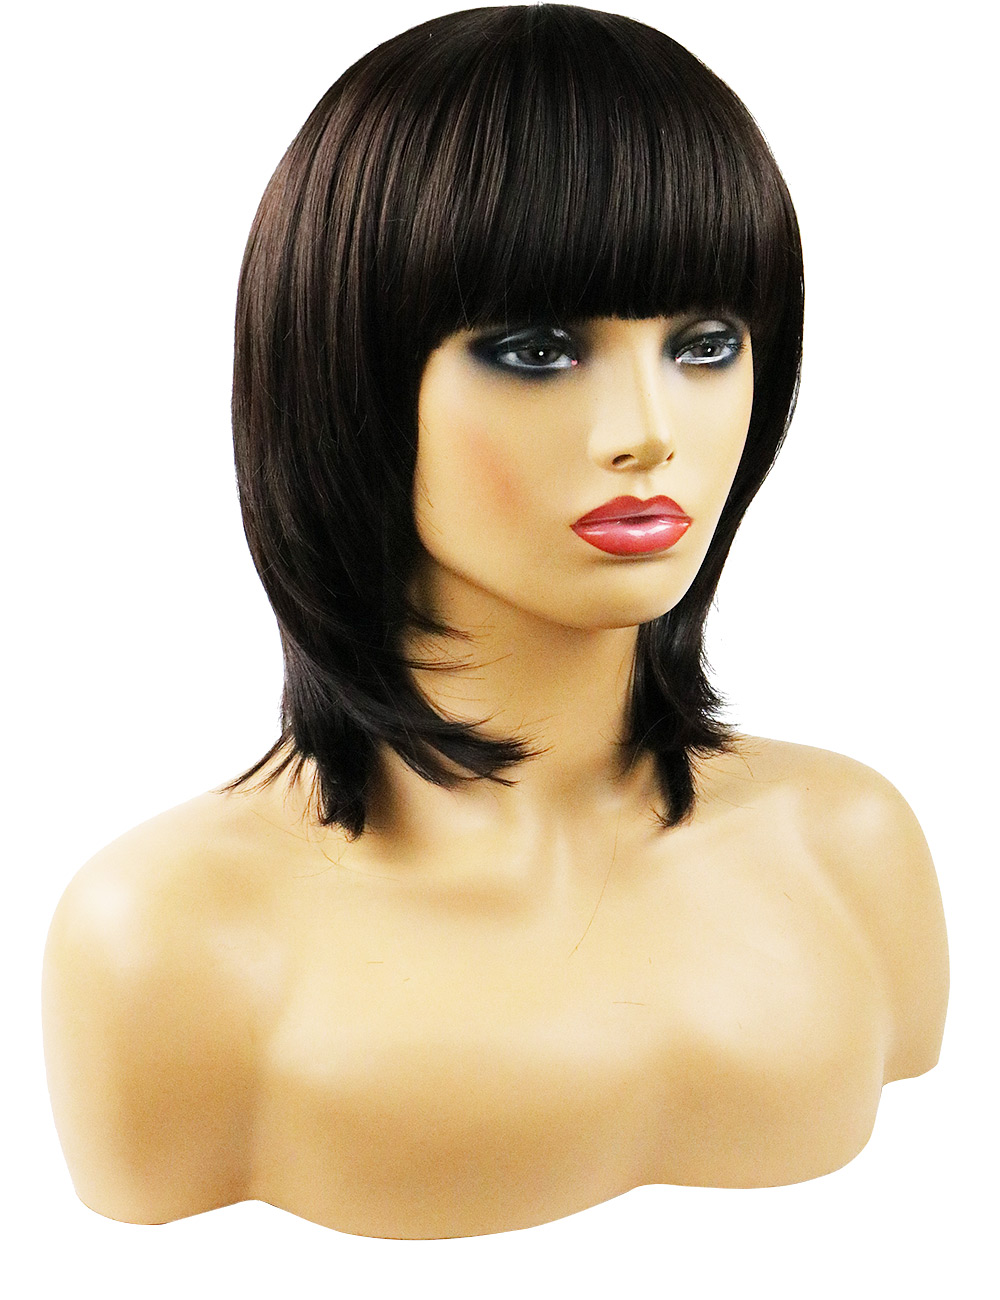 Layered Shag Hairstyle with Full Fringe Middle Length Synthetic Capless Women Wigs 12 Inches